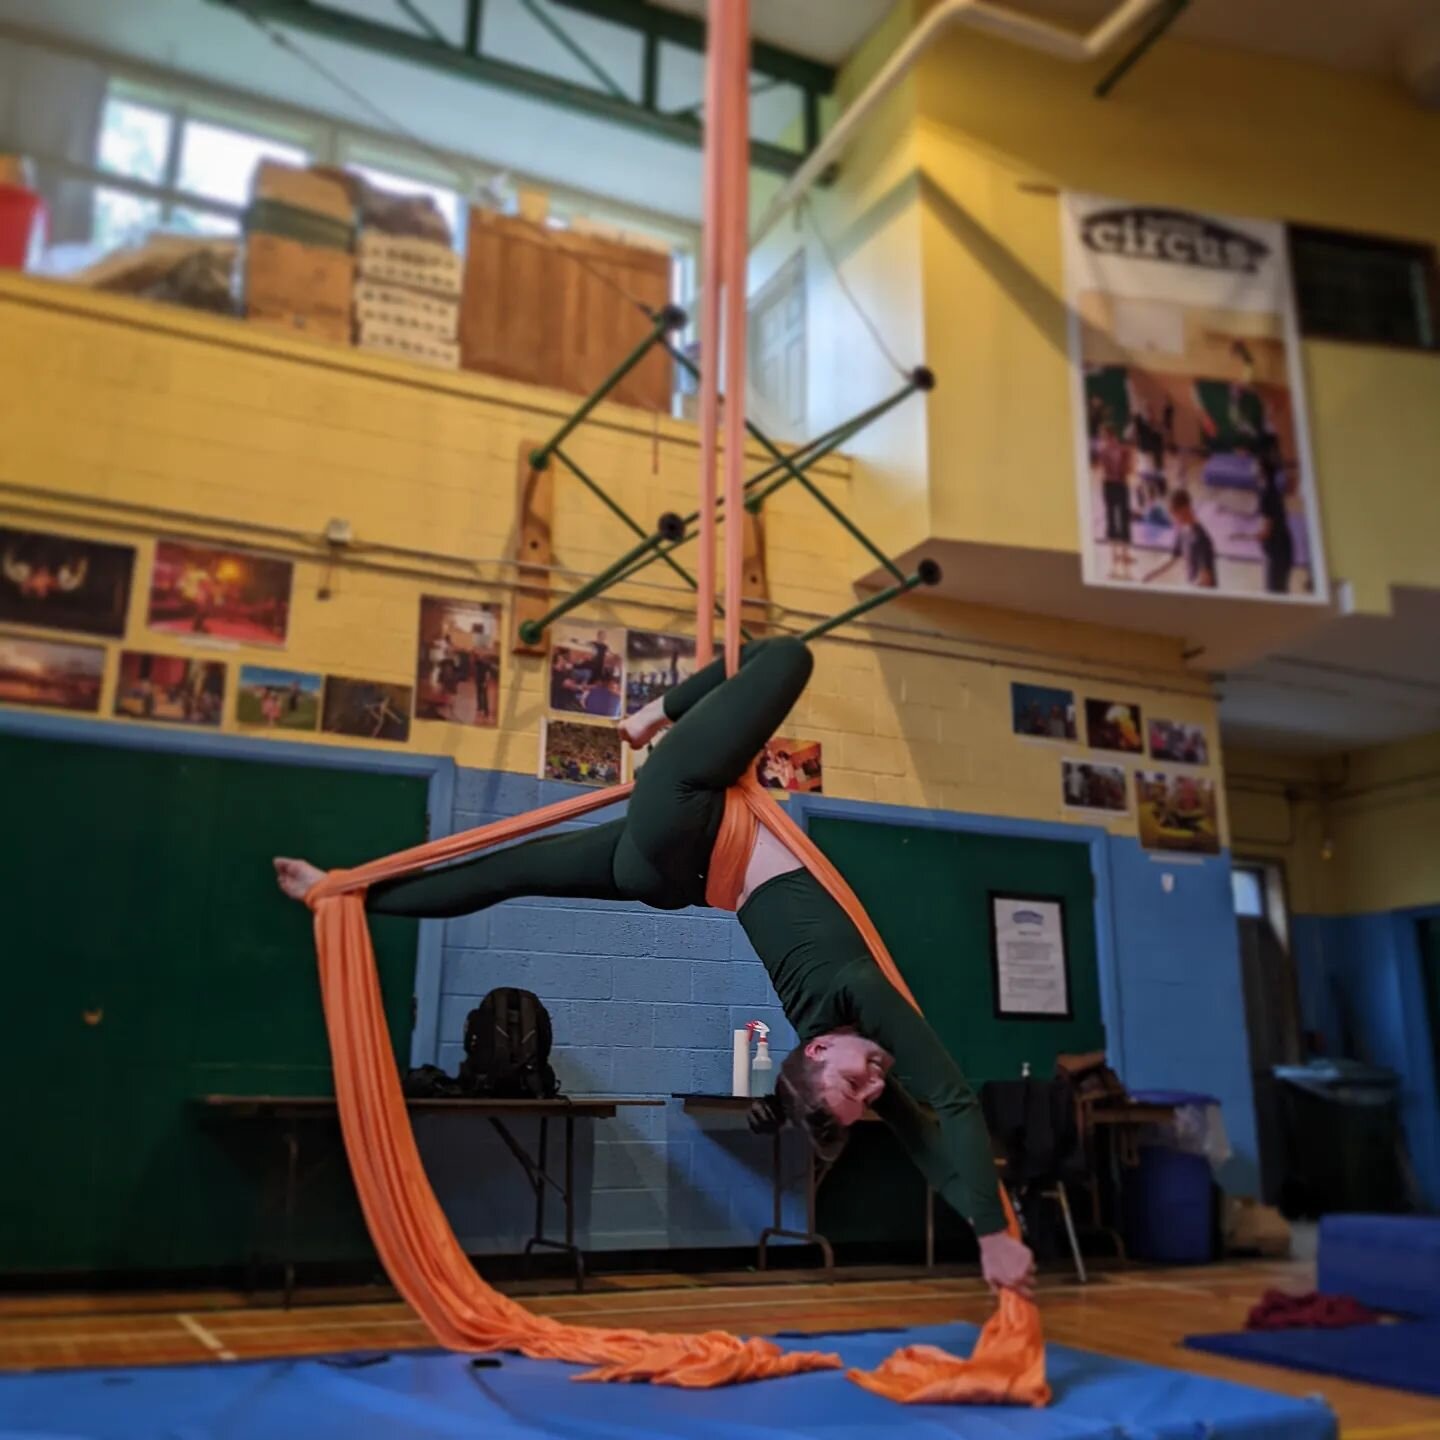 Want to try circus with ✨ no commitment?✨ Today is your day! Try the following classes at Halifax Circus as a drop-in class today!
🎪Aerial Fabric - 5-6:30pm
🎪Aerial Hoop - 6:30-8pm
🎪Basic Acrobatics - 6:30-8pm

✨Pricing✨
$30+tax - Visiting Student